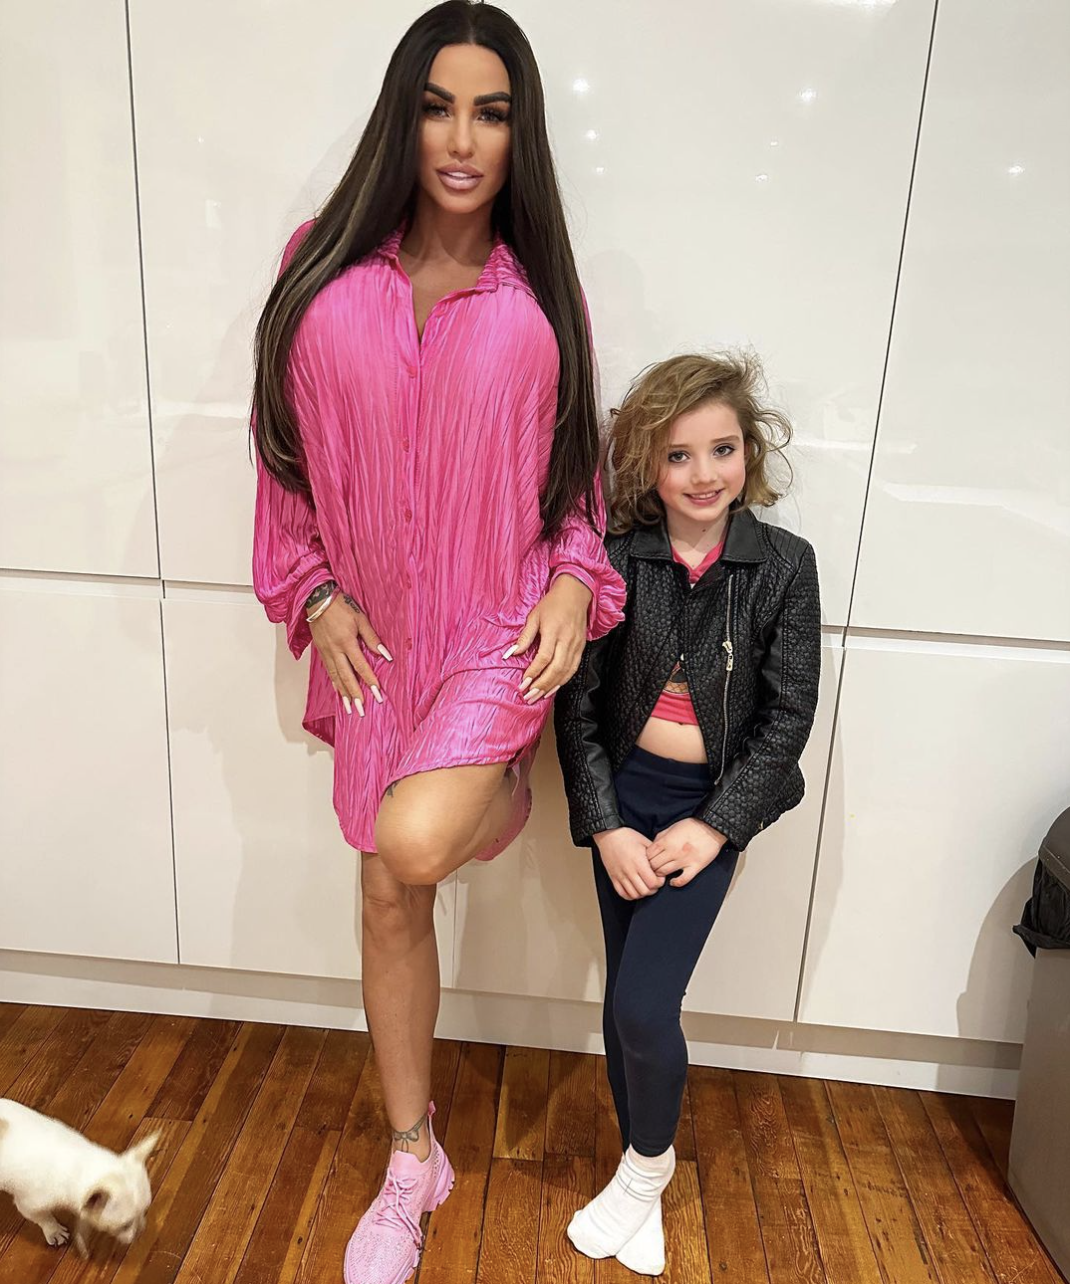 Katie Price Hit With Backlash After Daughter Reveals Onlyfans Plans